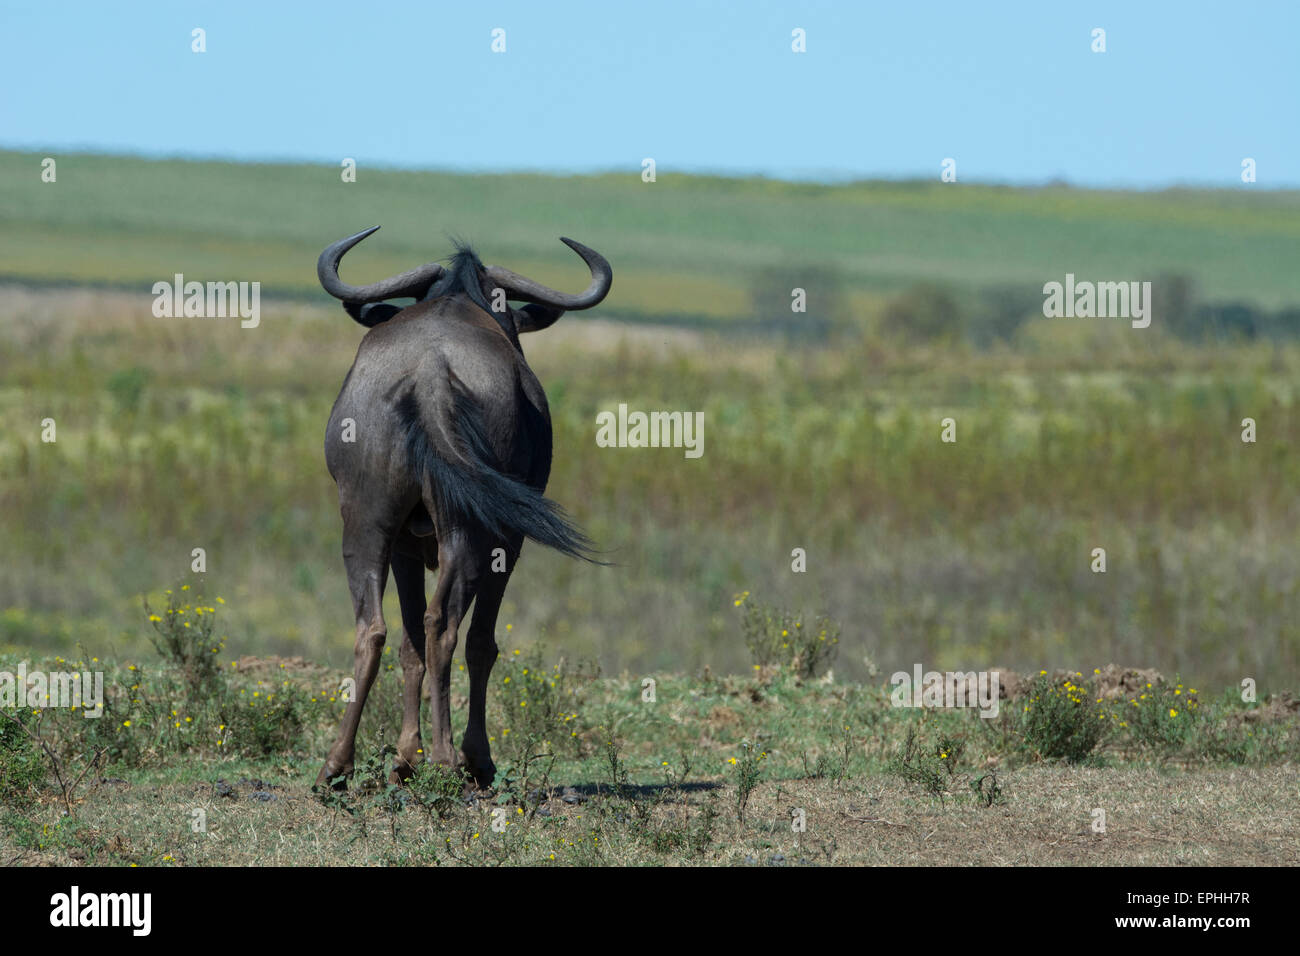 South Africa, Durban. Tala Game Reserve. Blue wildebeest (WILD: Connochaetes taurinus) looking out over grassland habitat. Stock Photo